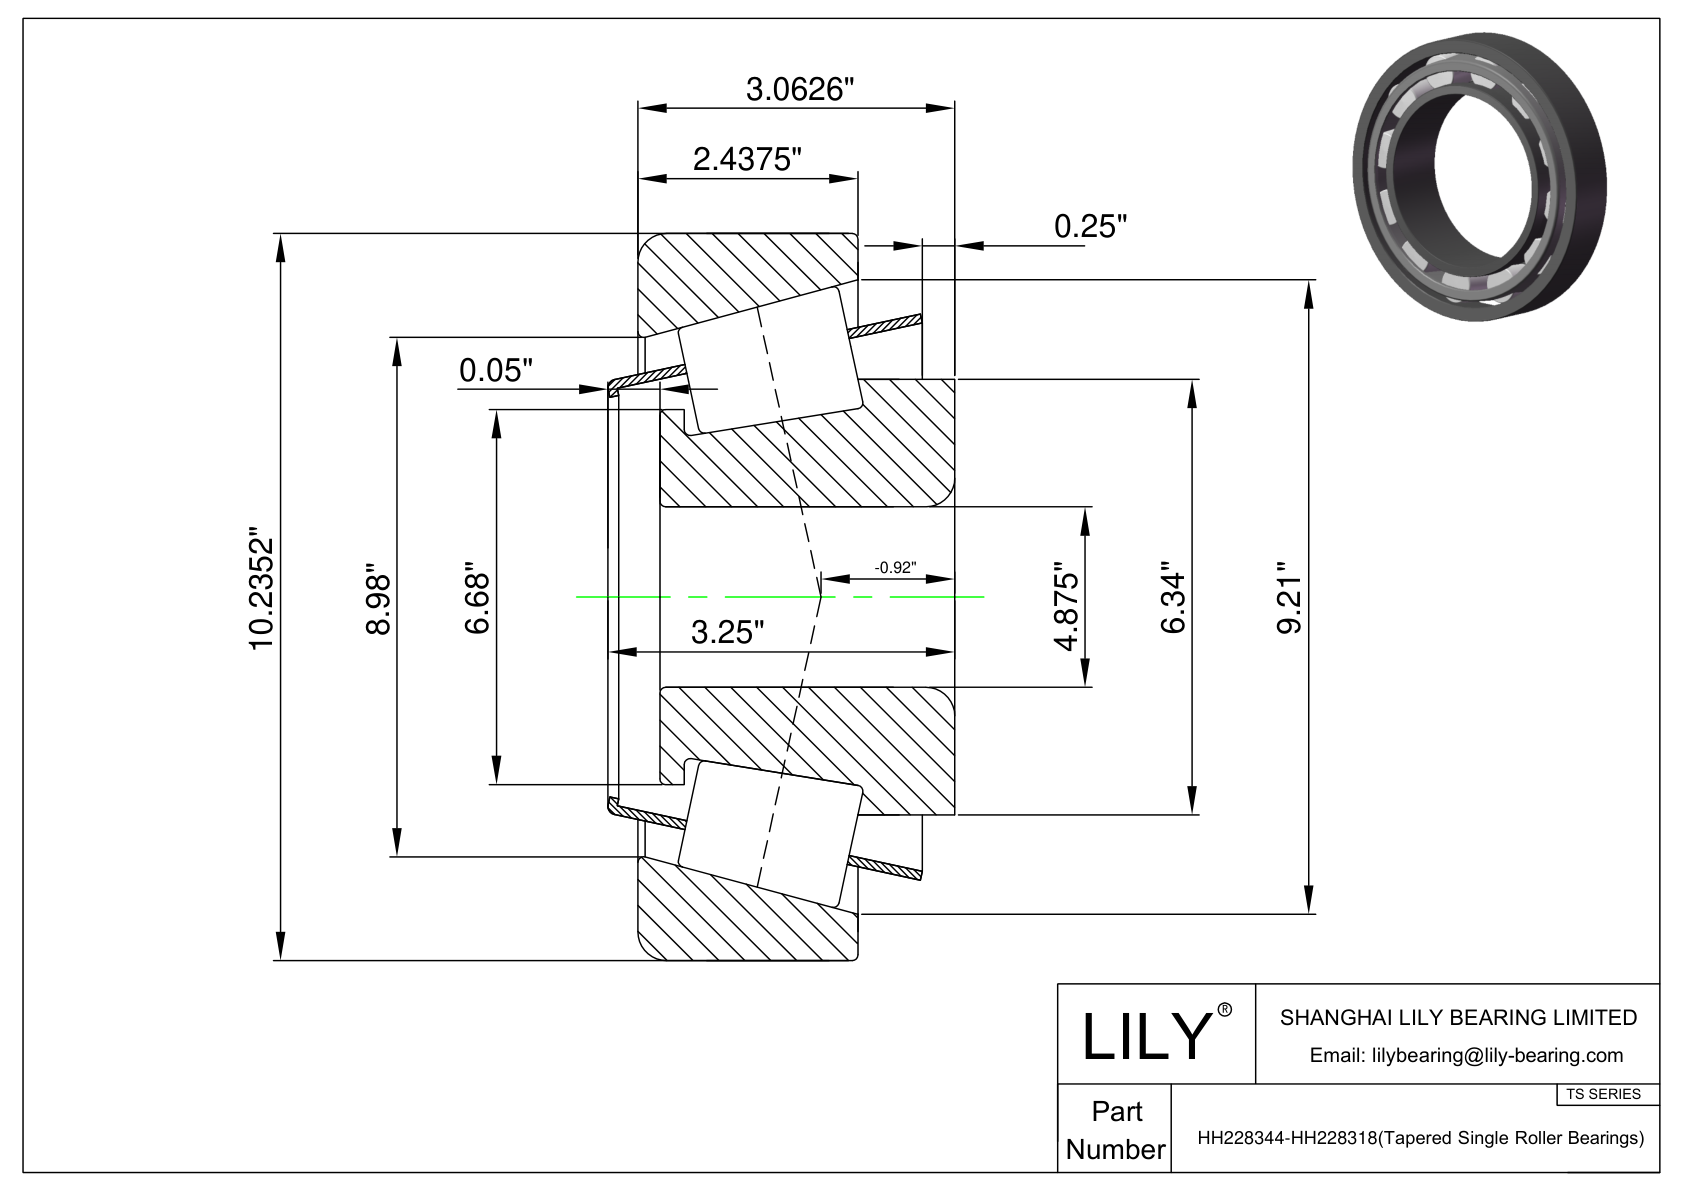 HH228344-HH228318 TS (Tapered Single Roller Bearings) (Imperial) cad drawing